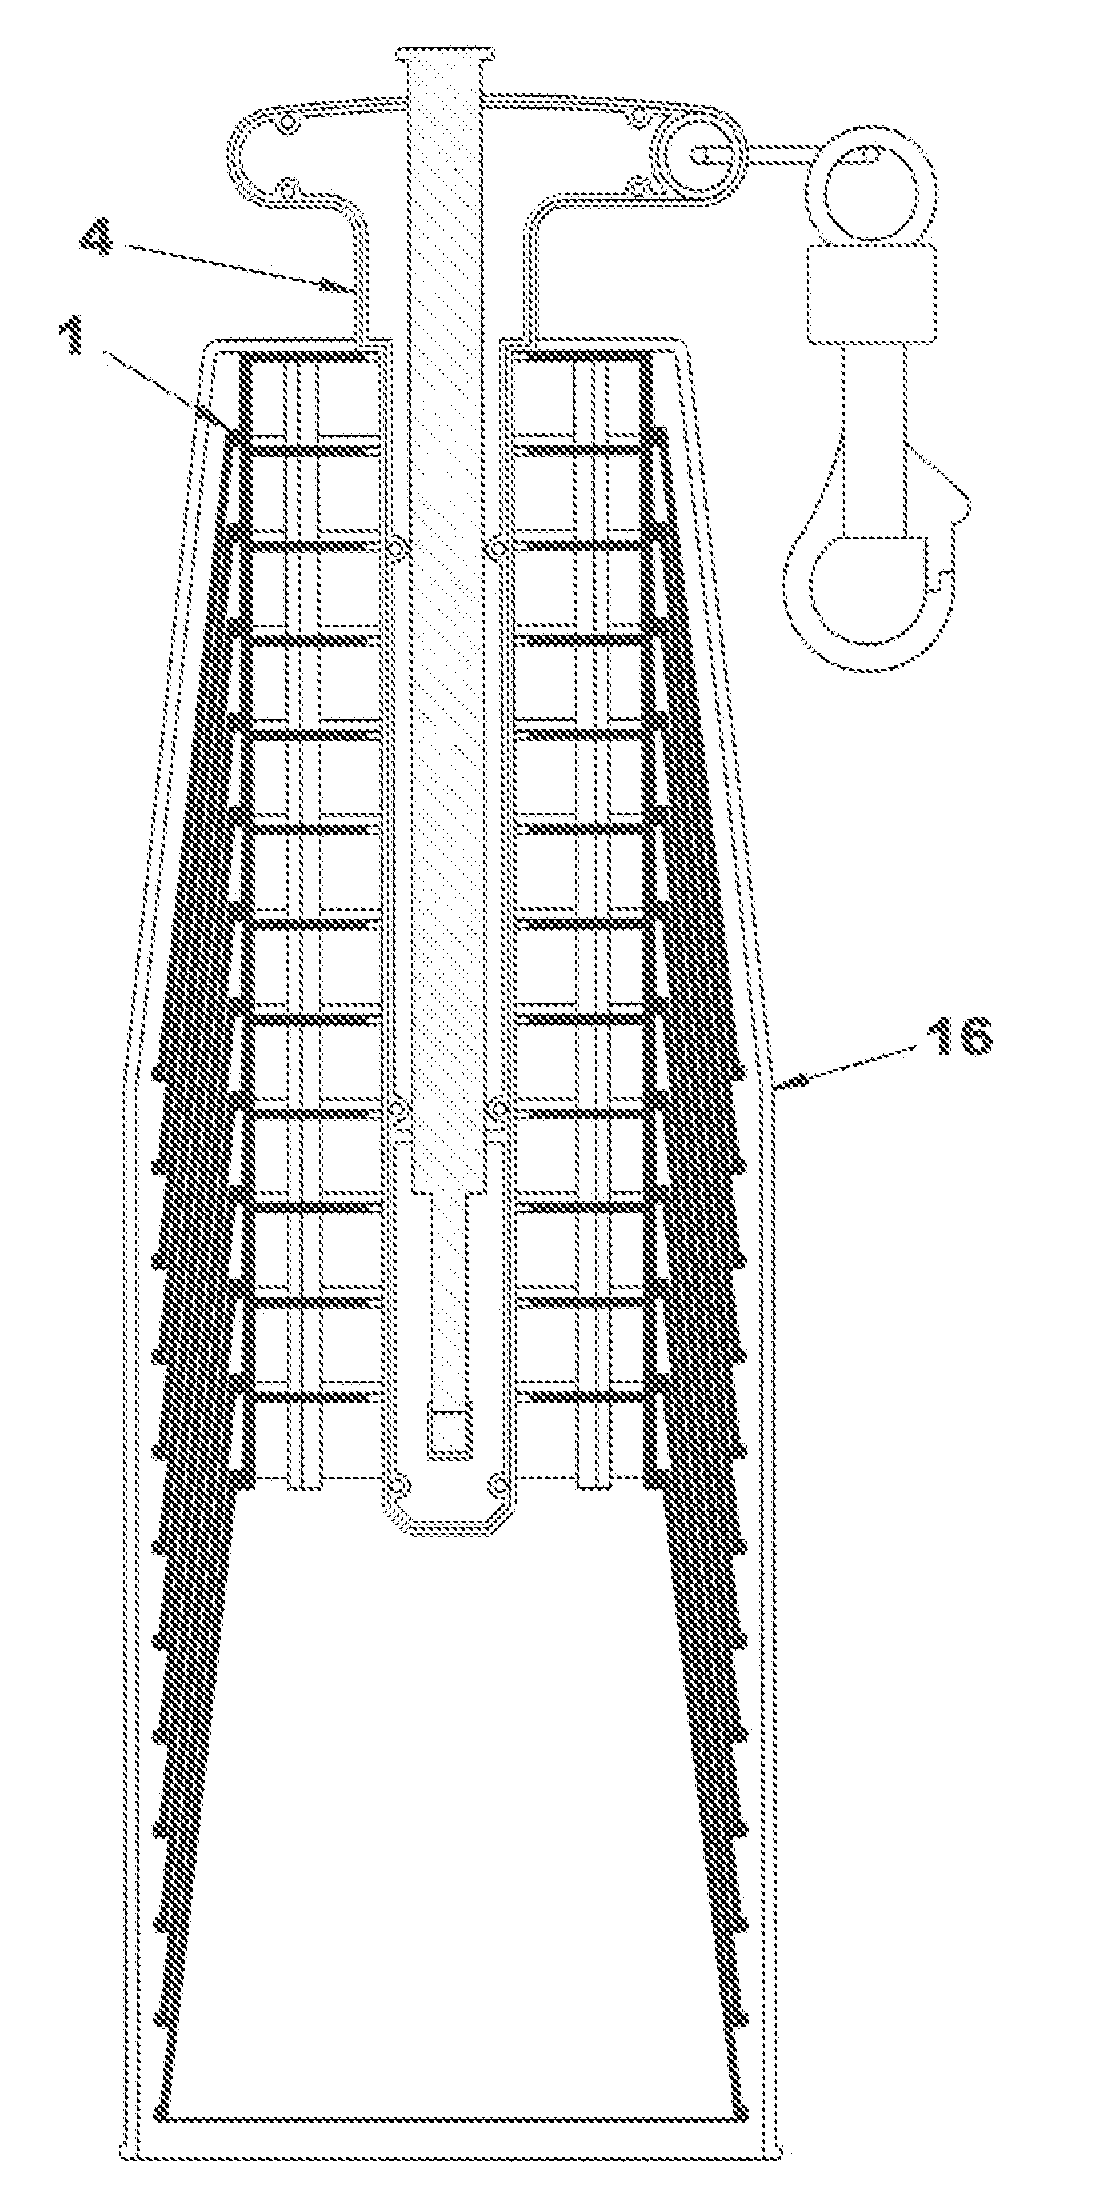 Holding device for sport stacking cups